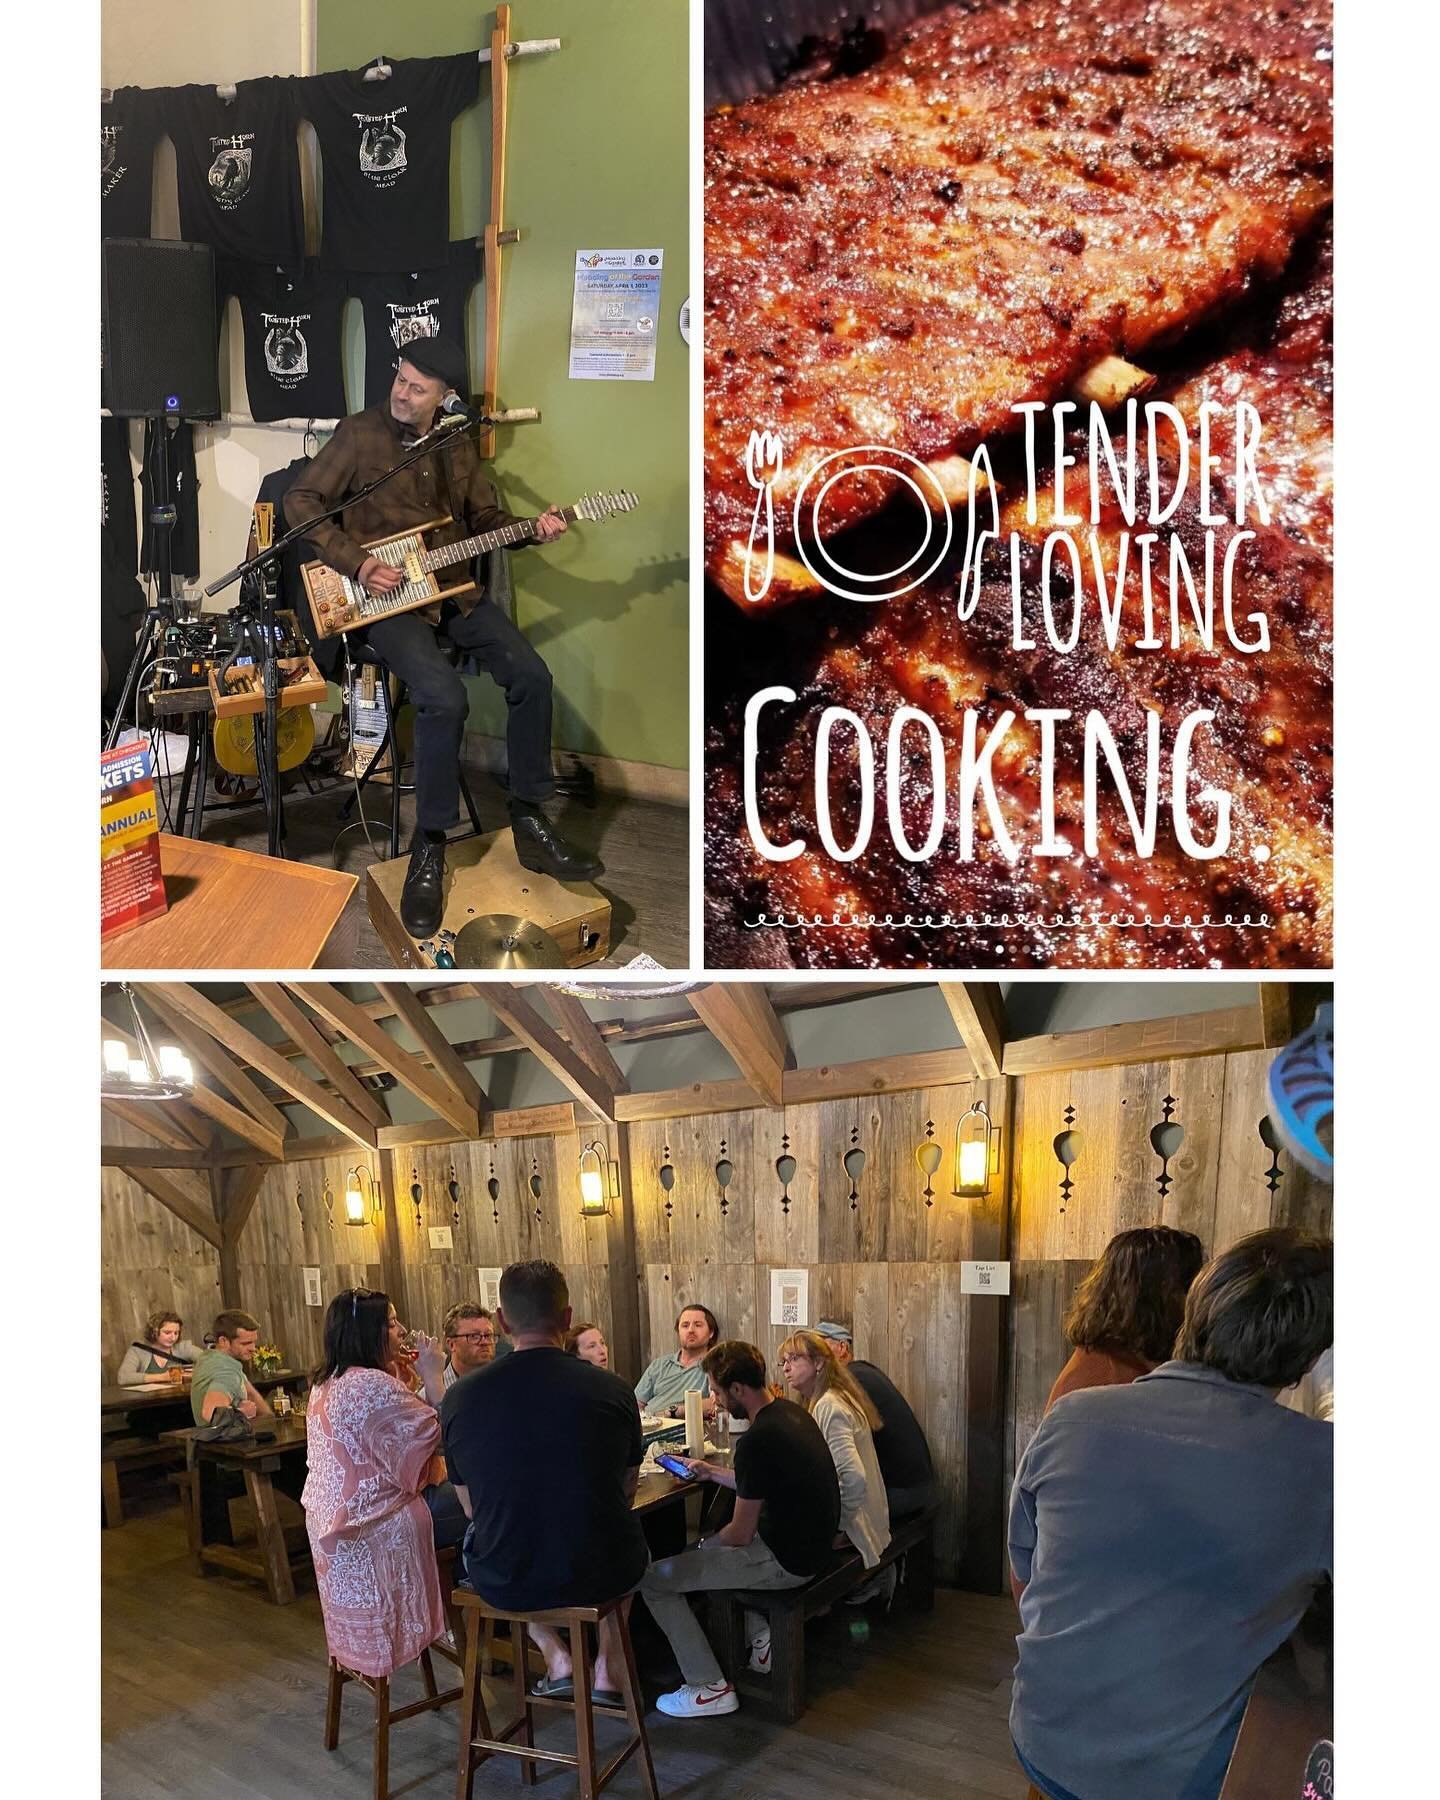 Got a good pairing tonight at TH. @nathandjamesmusic will be putting on an awesome Blues/Bluegrass show Just for you while @tenderlovingcooking2023 will be bringing the New Orleans fusion food just for you. See you tonight! SK&Aring;L!!!